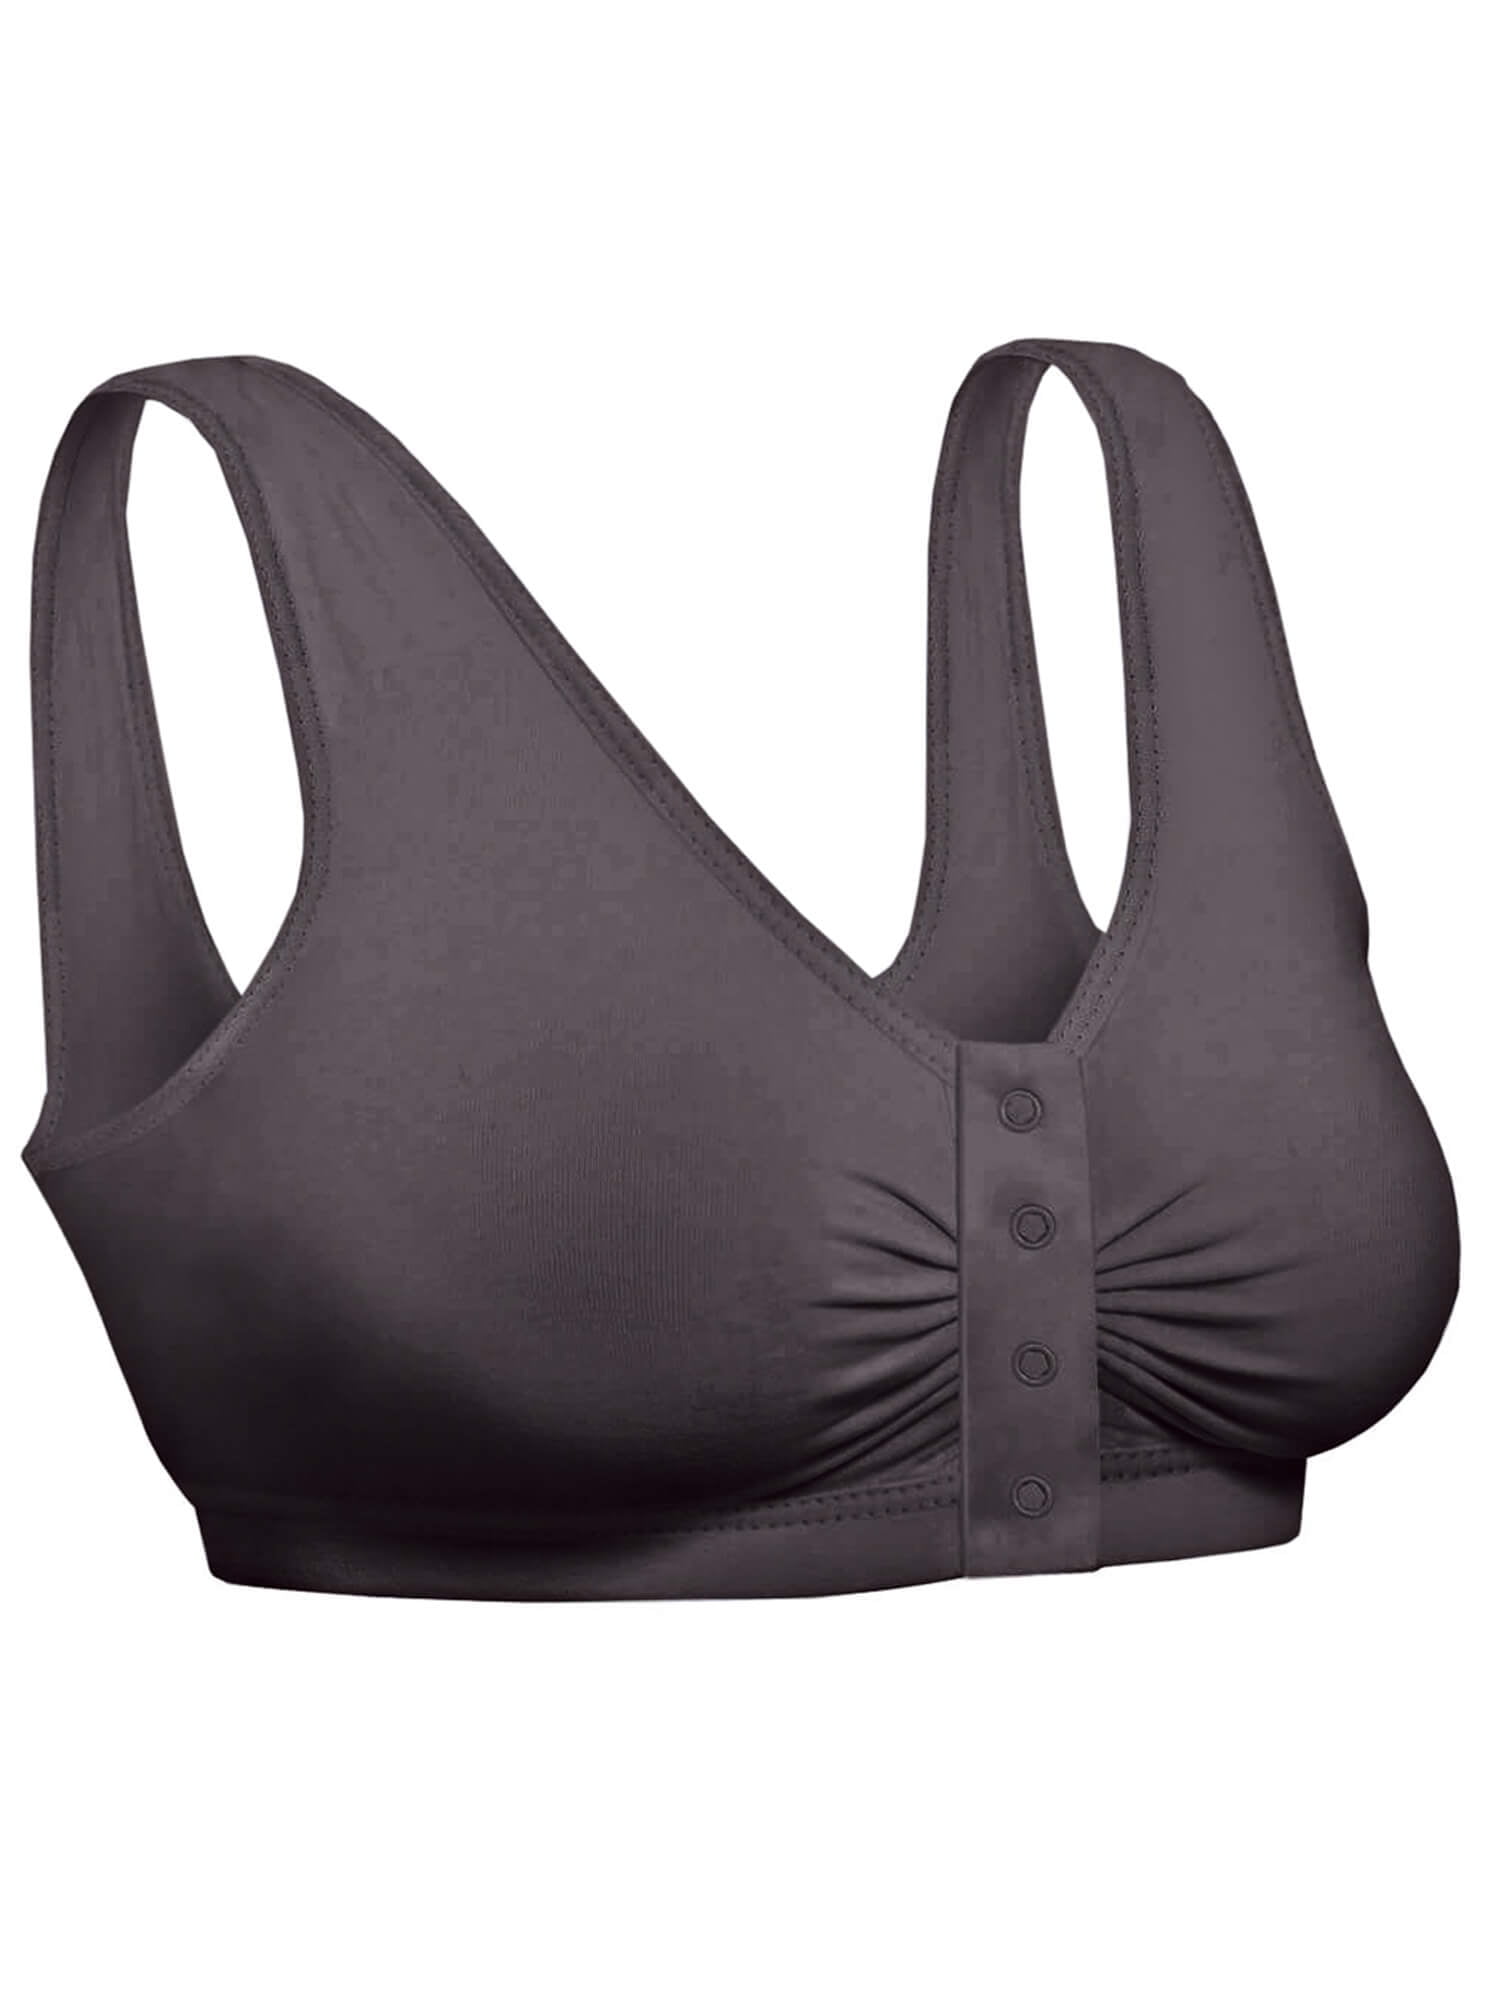 Snap Front Seamless Bra with Ultra-Wide Straps For Comfort and Support,  Plush Fabric - Black, Large